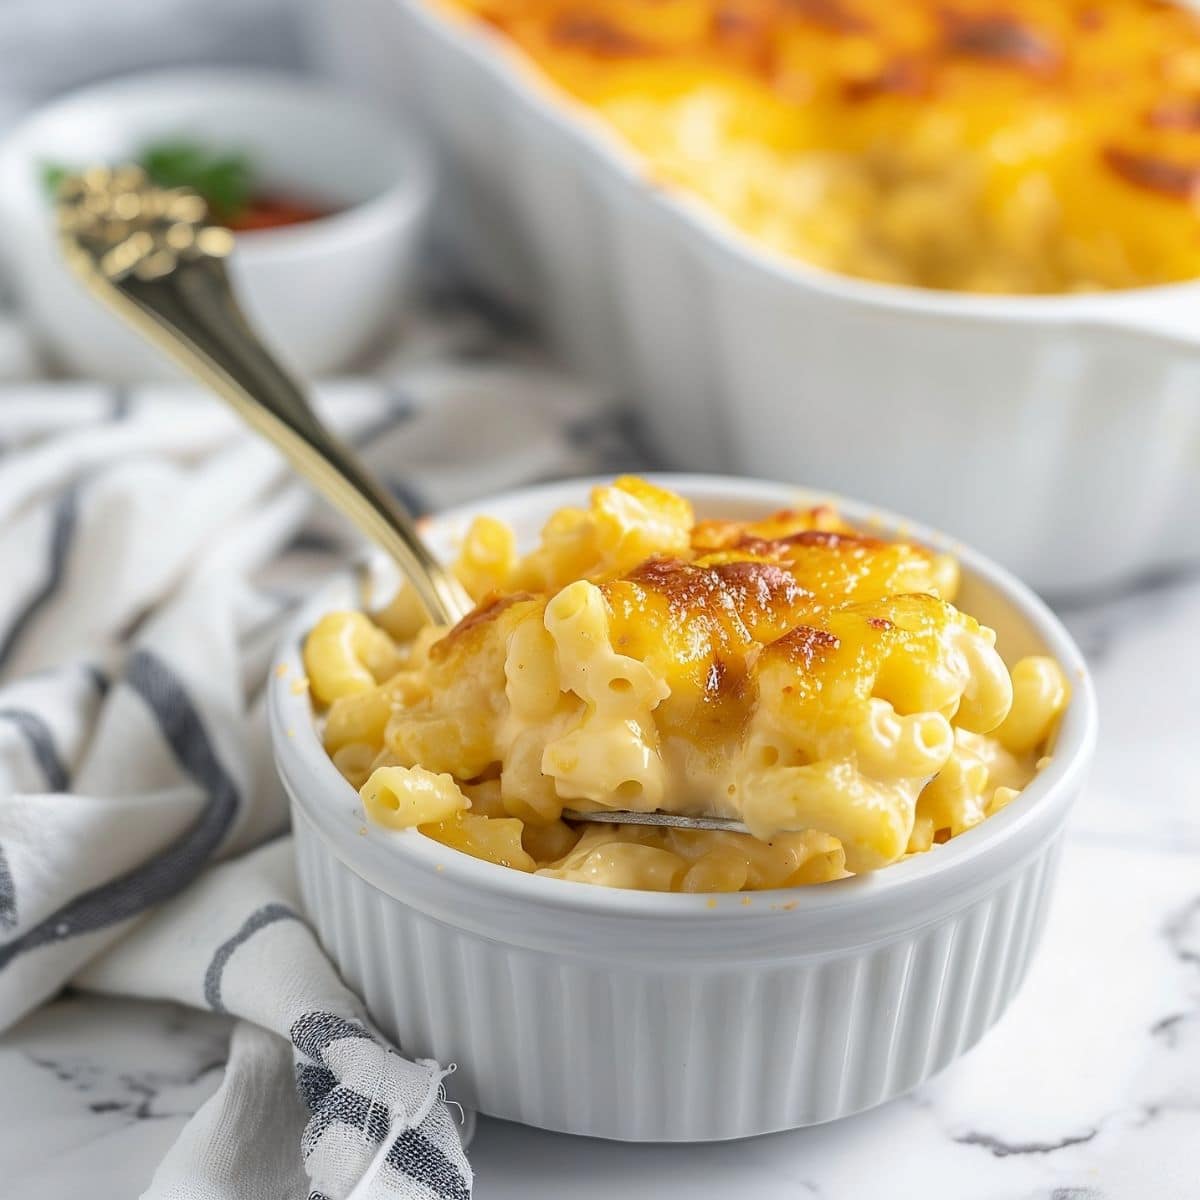 Gooey, Cheesy Sweetie Pie's Mac and Cheese with a Browned Cheese Topping and a Spoon in a White Bowl on a White Marble Table and a Full Casserole Dish in the Background